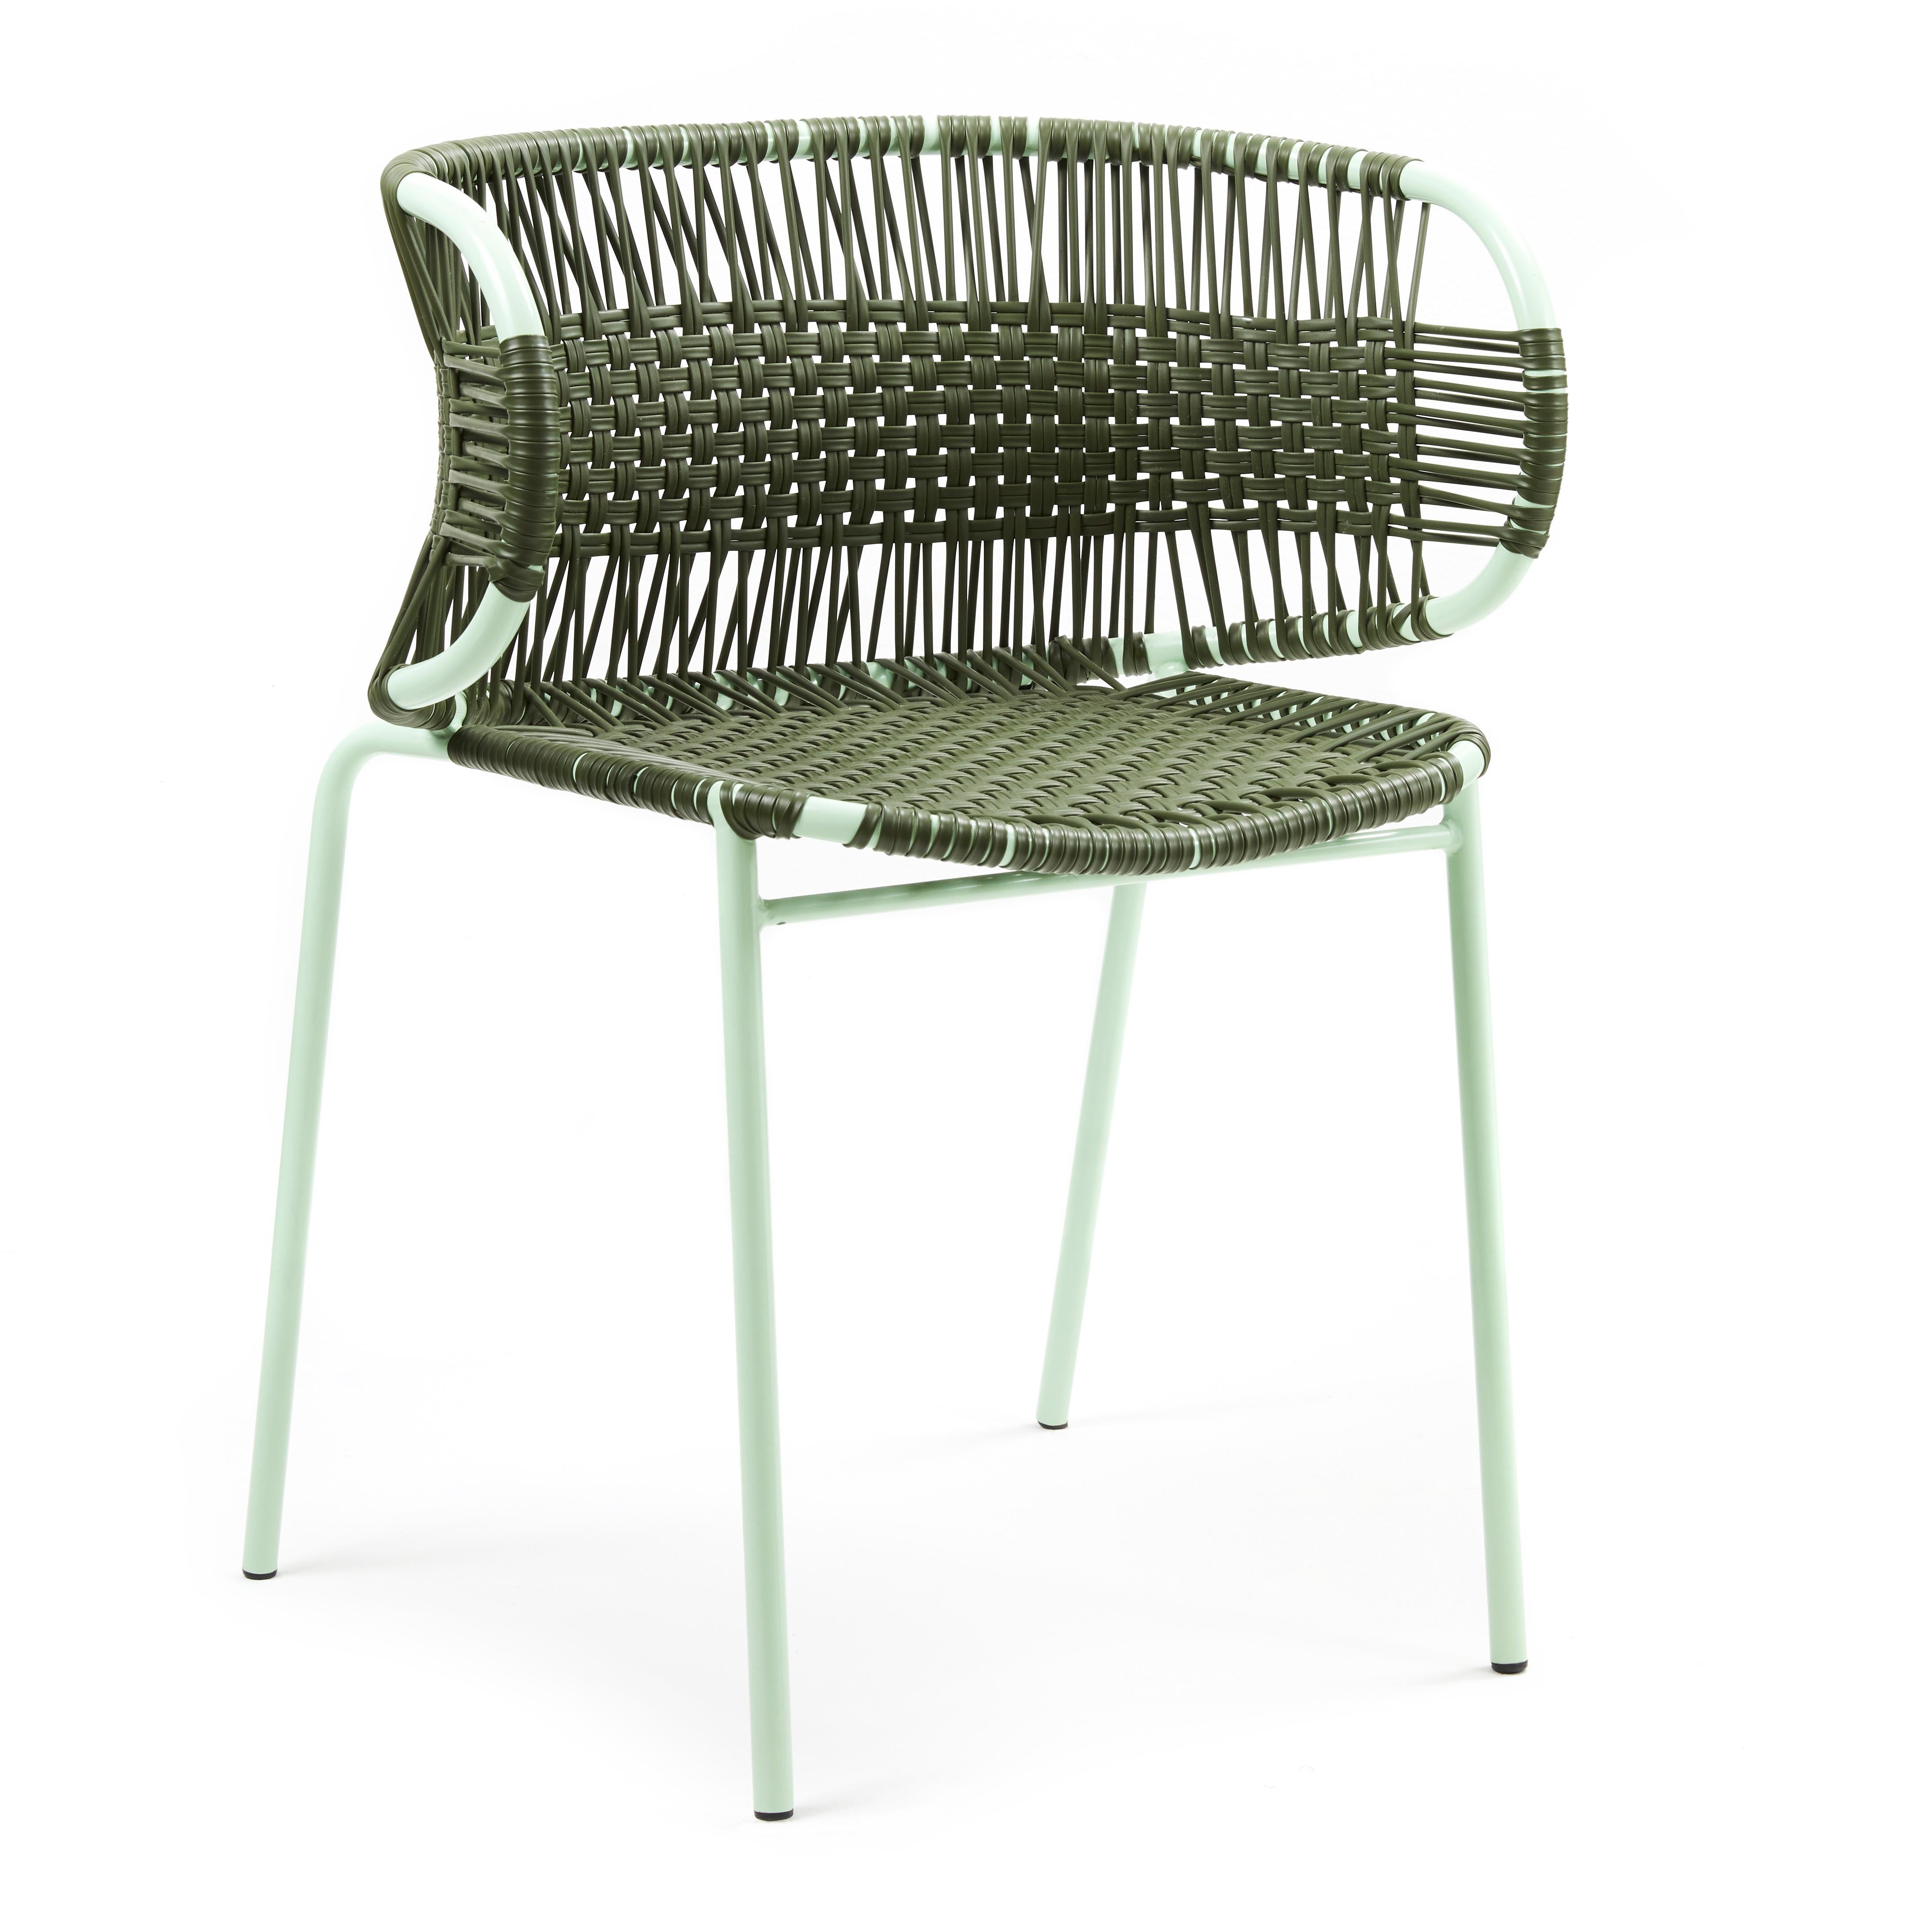 Olive Cielo Stacking chair with Armrest by Sebastian Herkner
Materials: Galvanized and powder-coated tubular steel. PVC strings are made from recycled plastic.
Technique: Made from recycled plastic and weaved by local craftspeople in Cartagena,